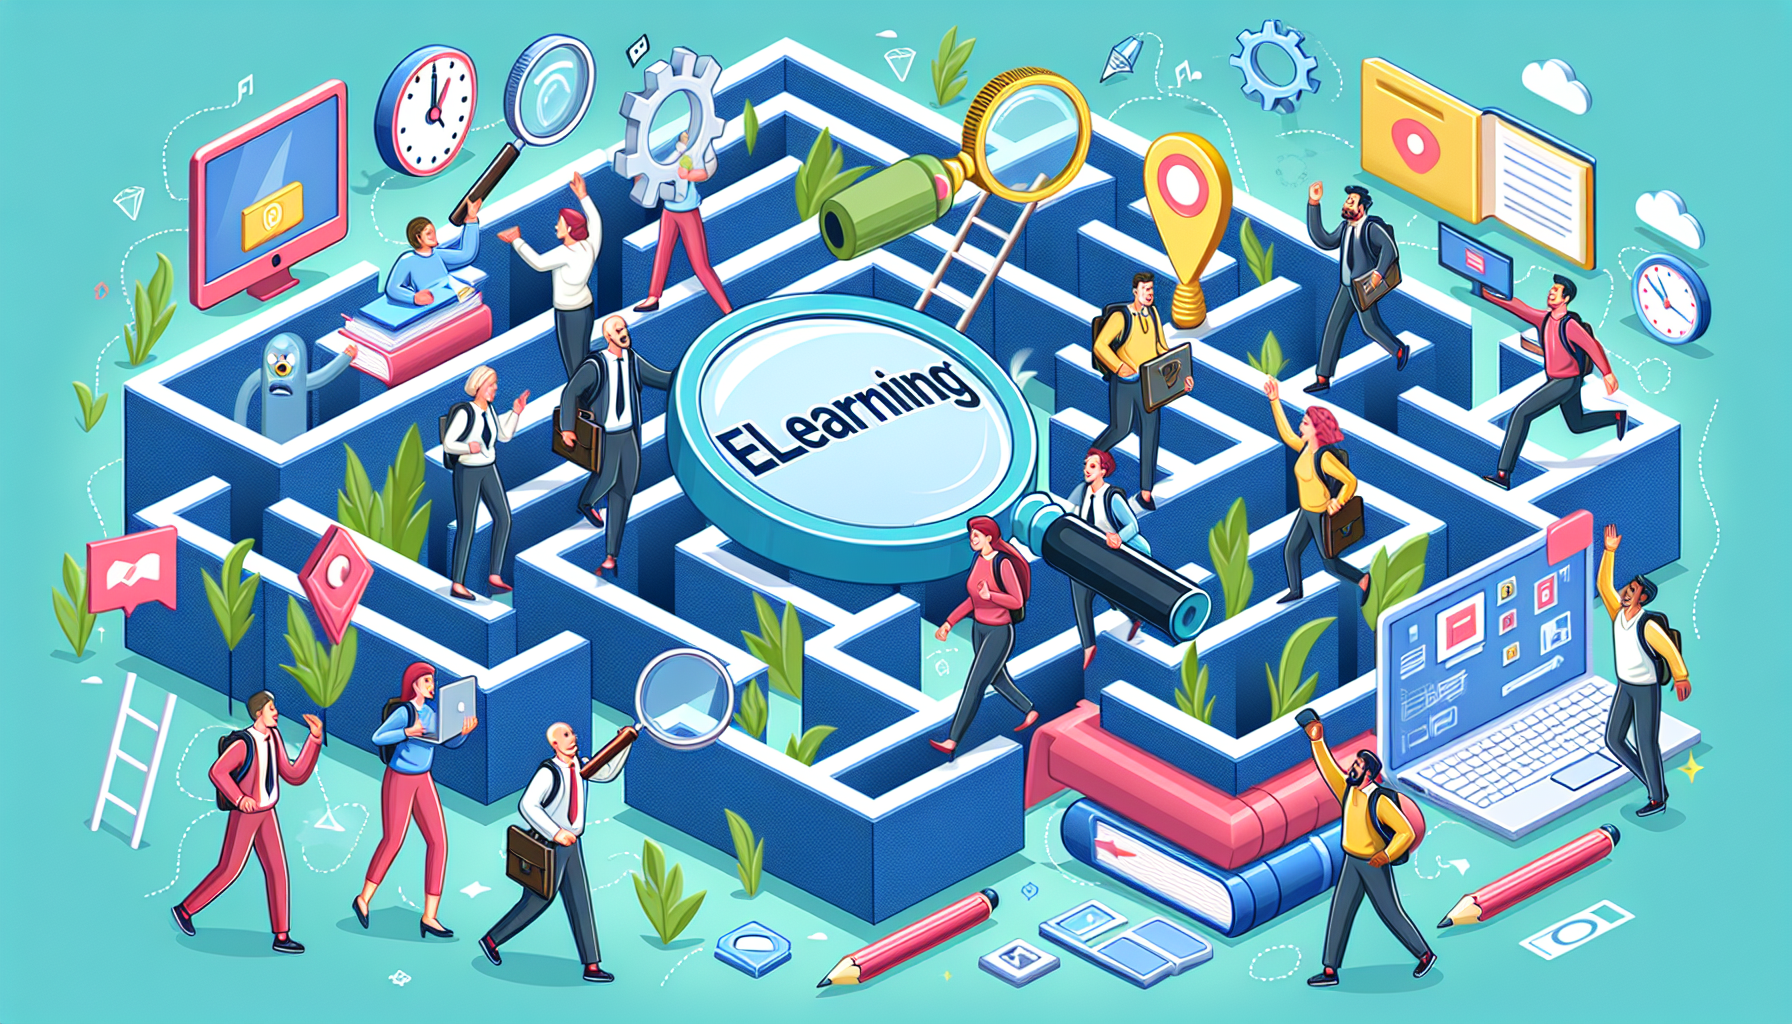 Illustration of overcoming challenges in the eLearning industry